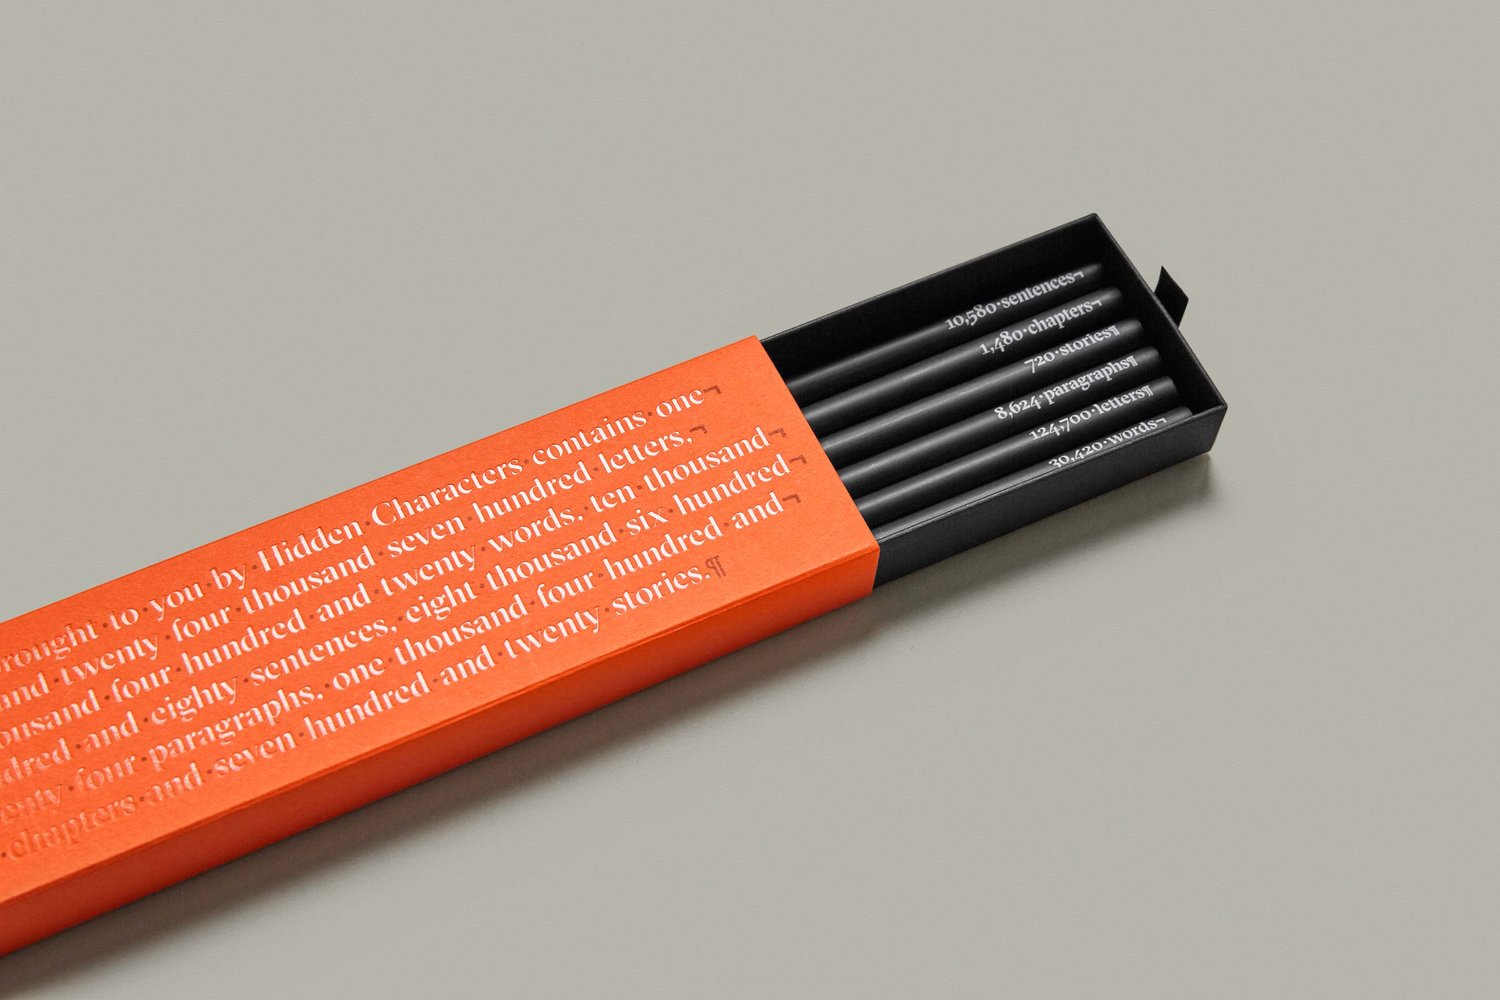 Brand identity, branded pencils and box for Sydney-based PR firm Hidden Characters by RE, Australia